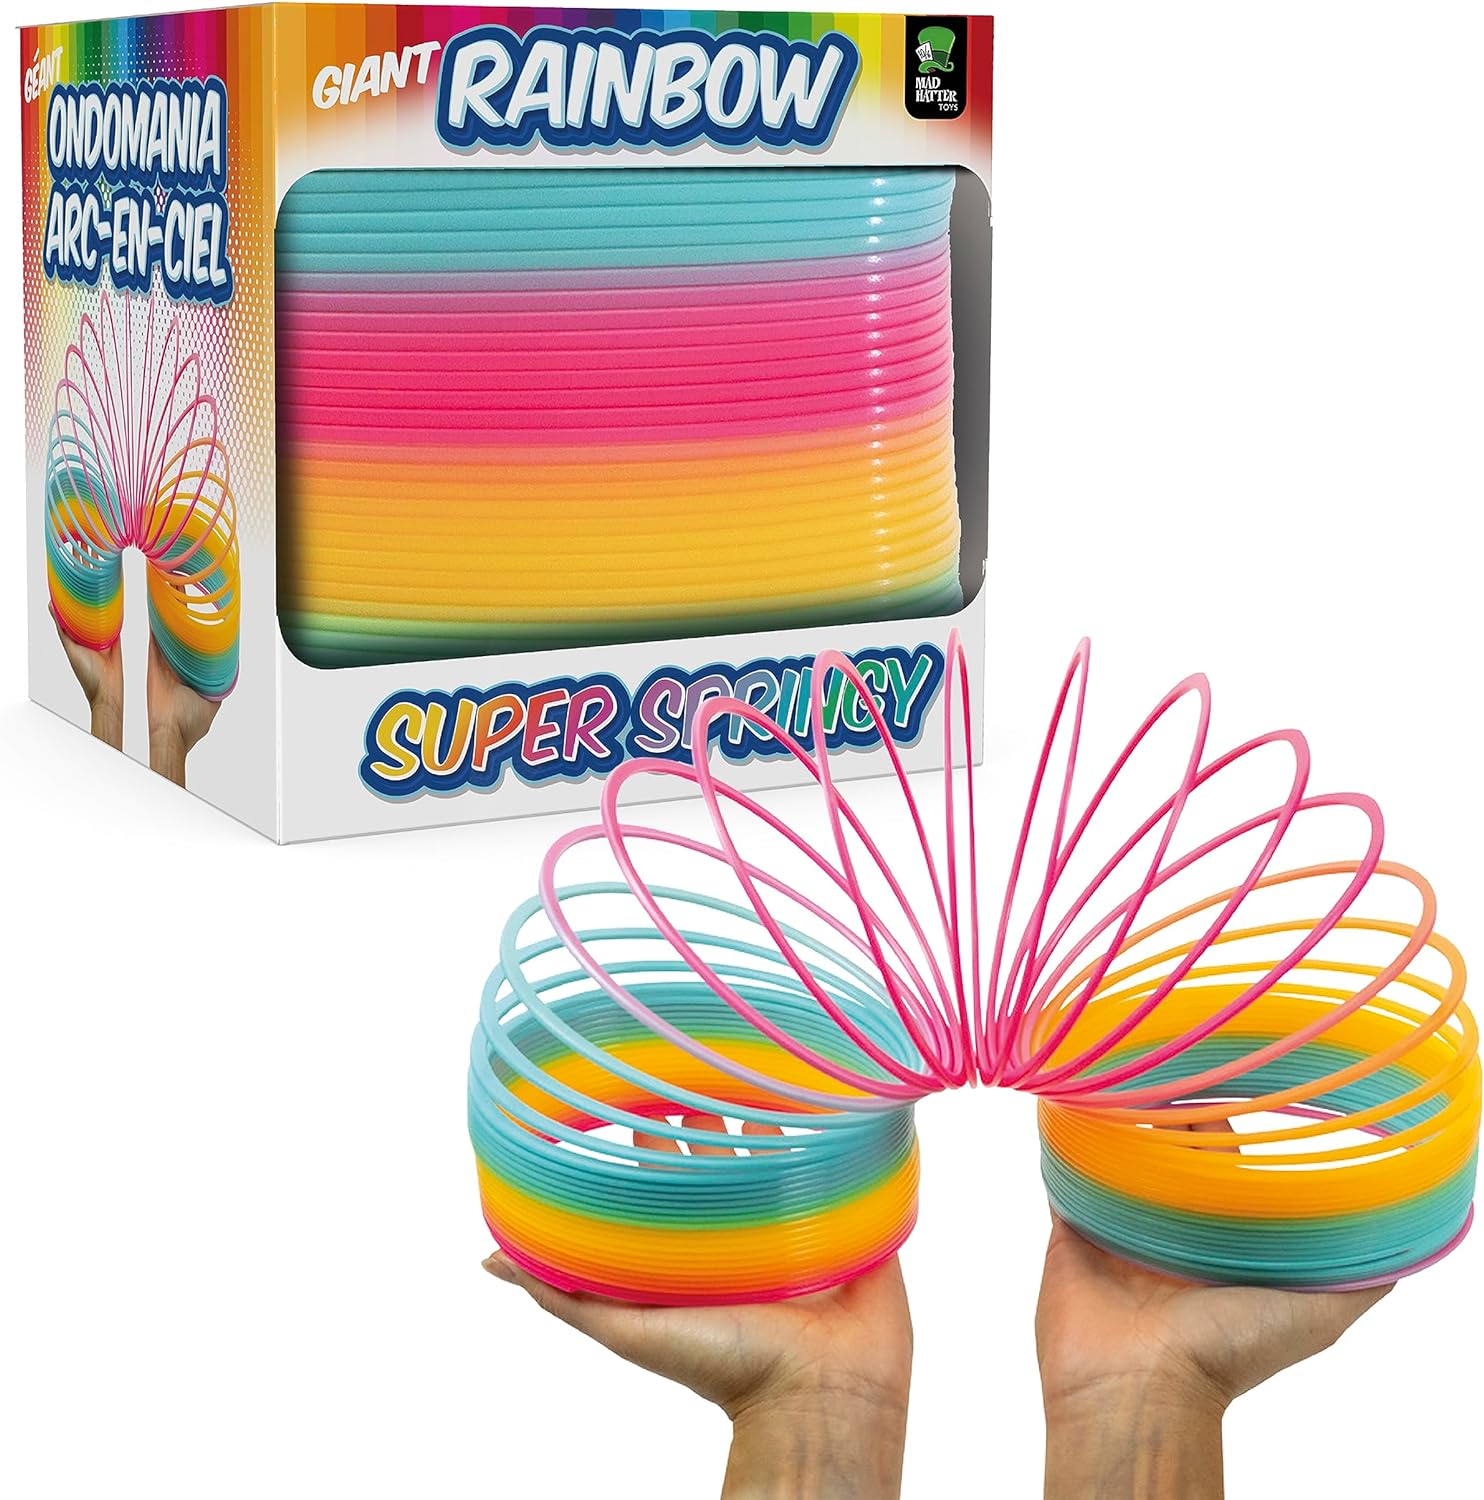 Funtime Gifts Giant Rainbow Springy